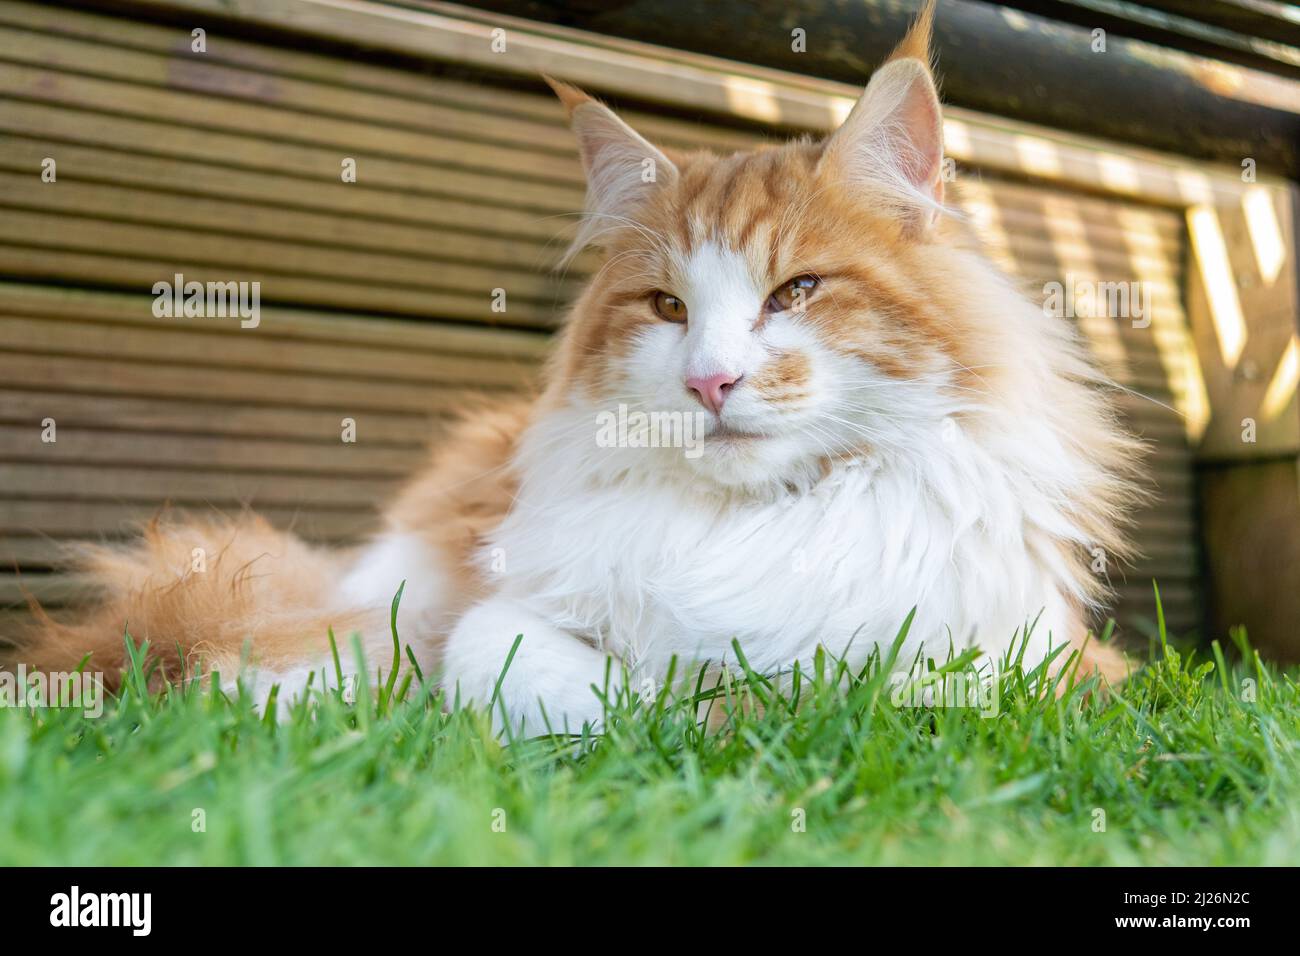 Norwegian Forest Cat lying on the grass in the shade. Ginger and White Long Haired Cat. Stock Photo